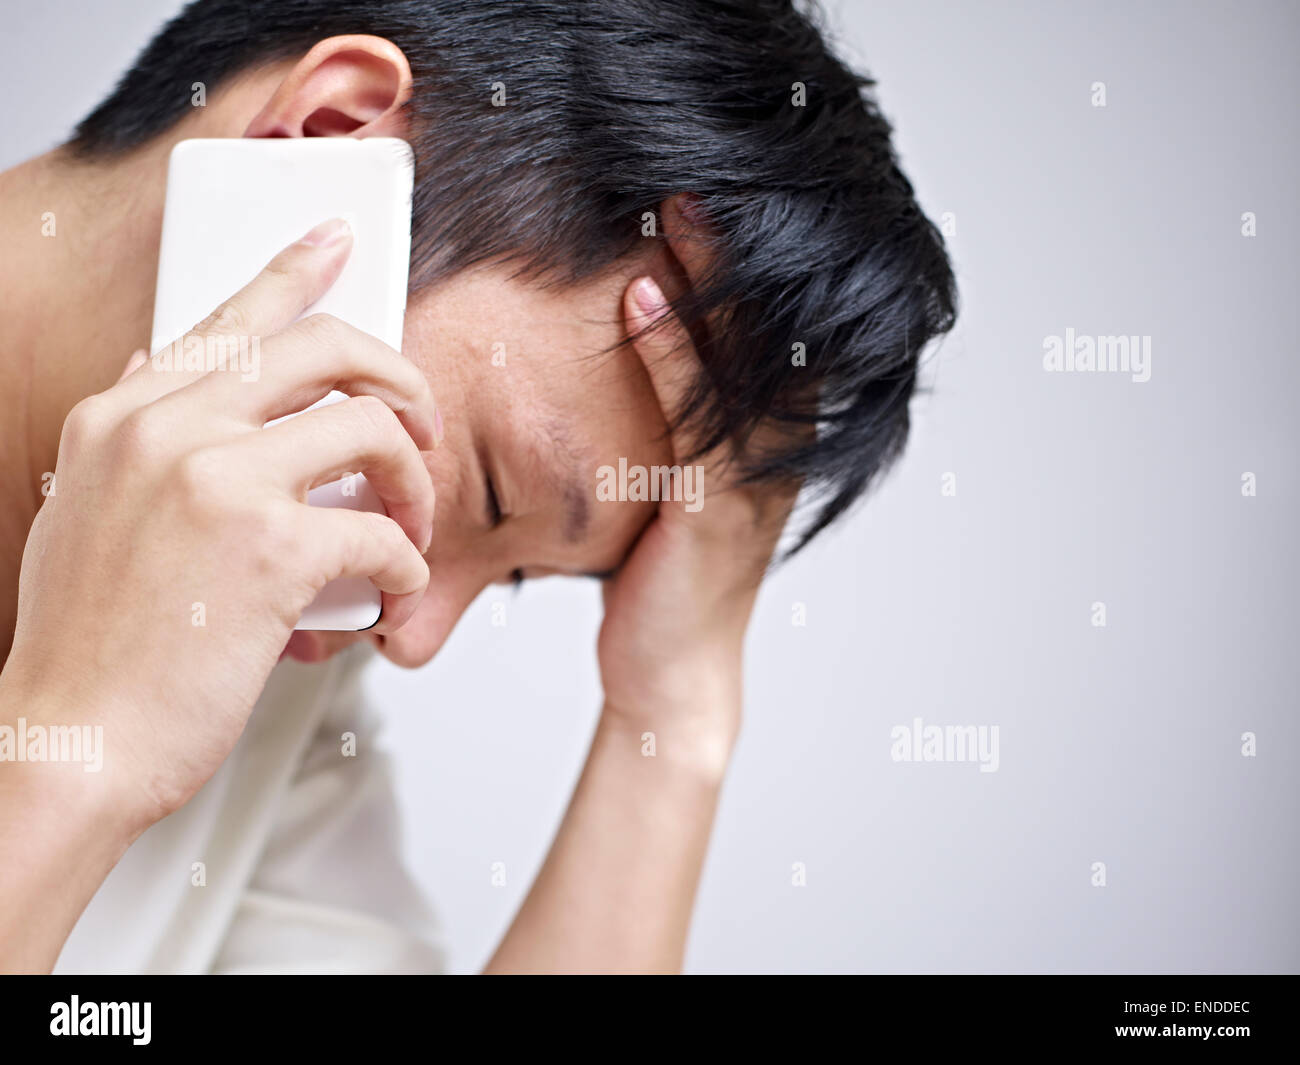 man on phone sad and frustrated Stock Photo